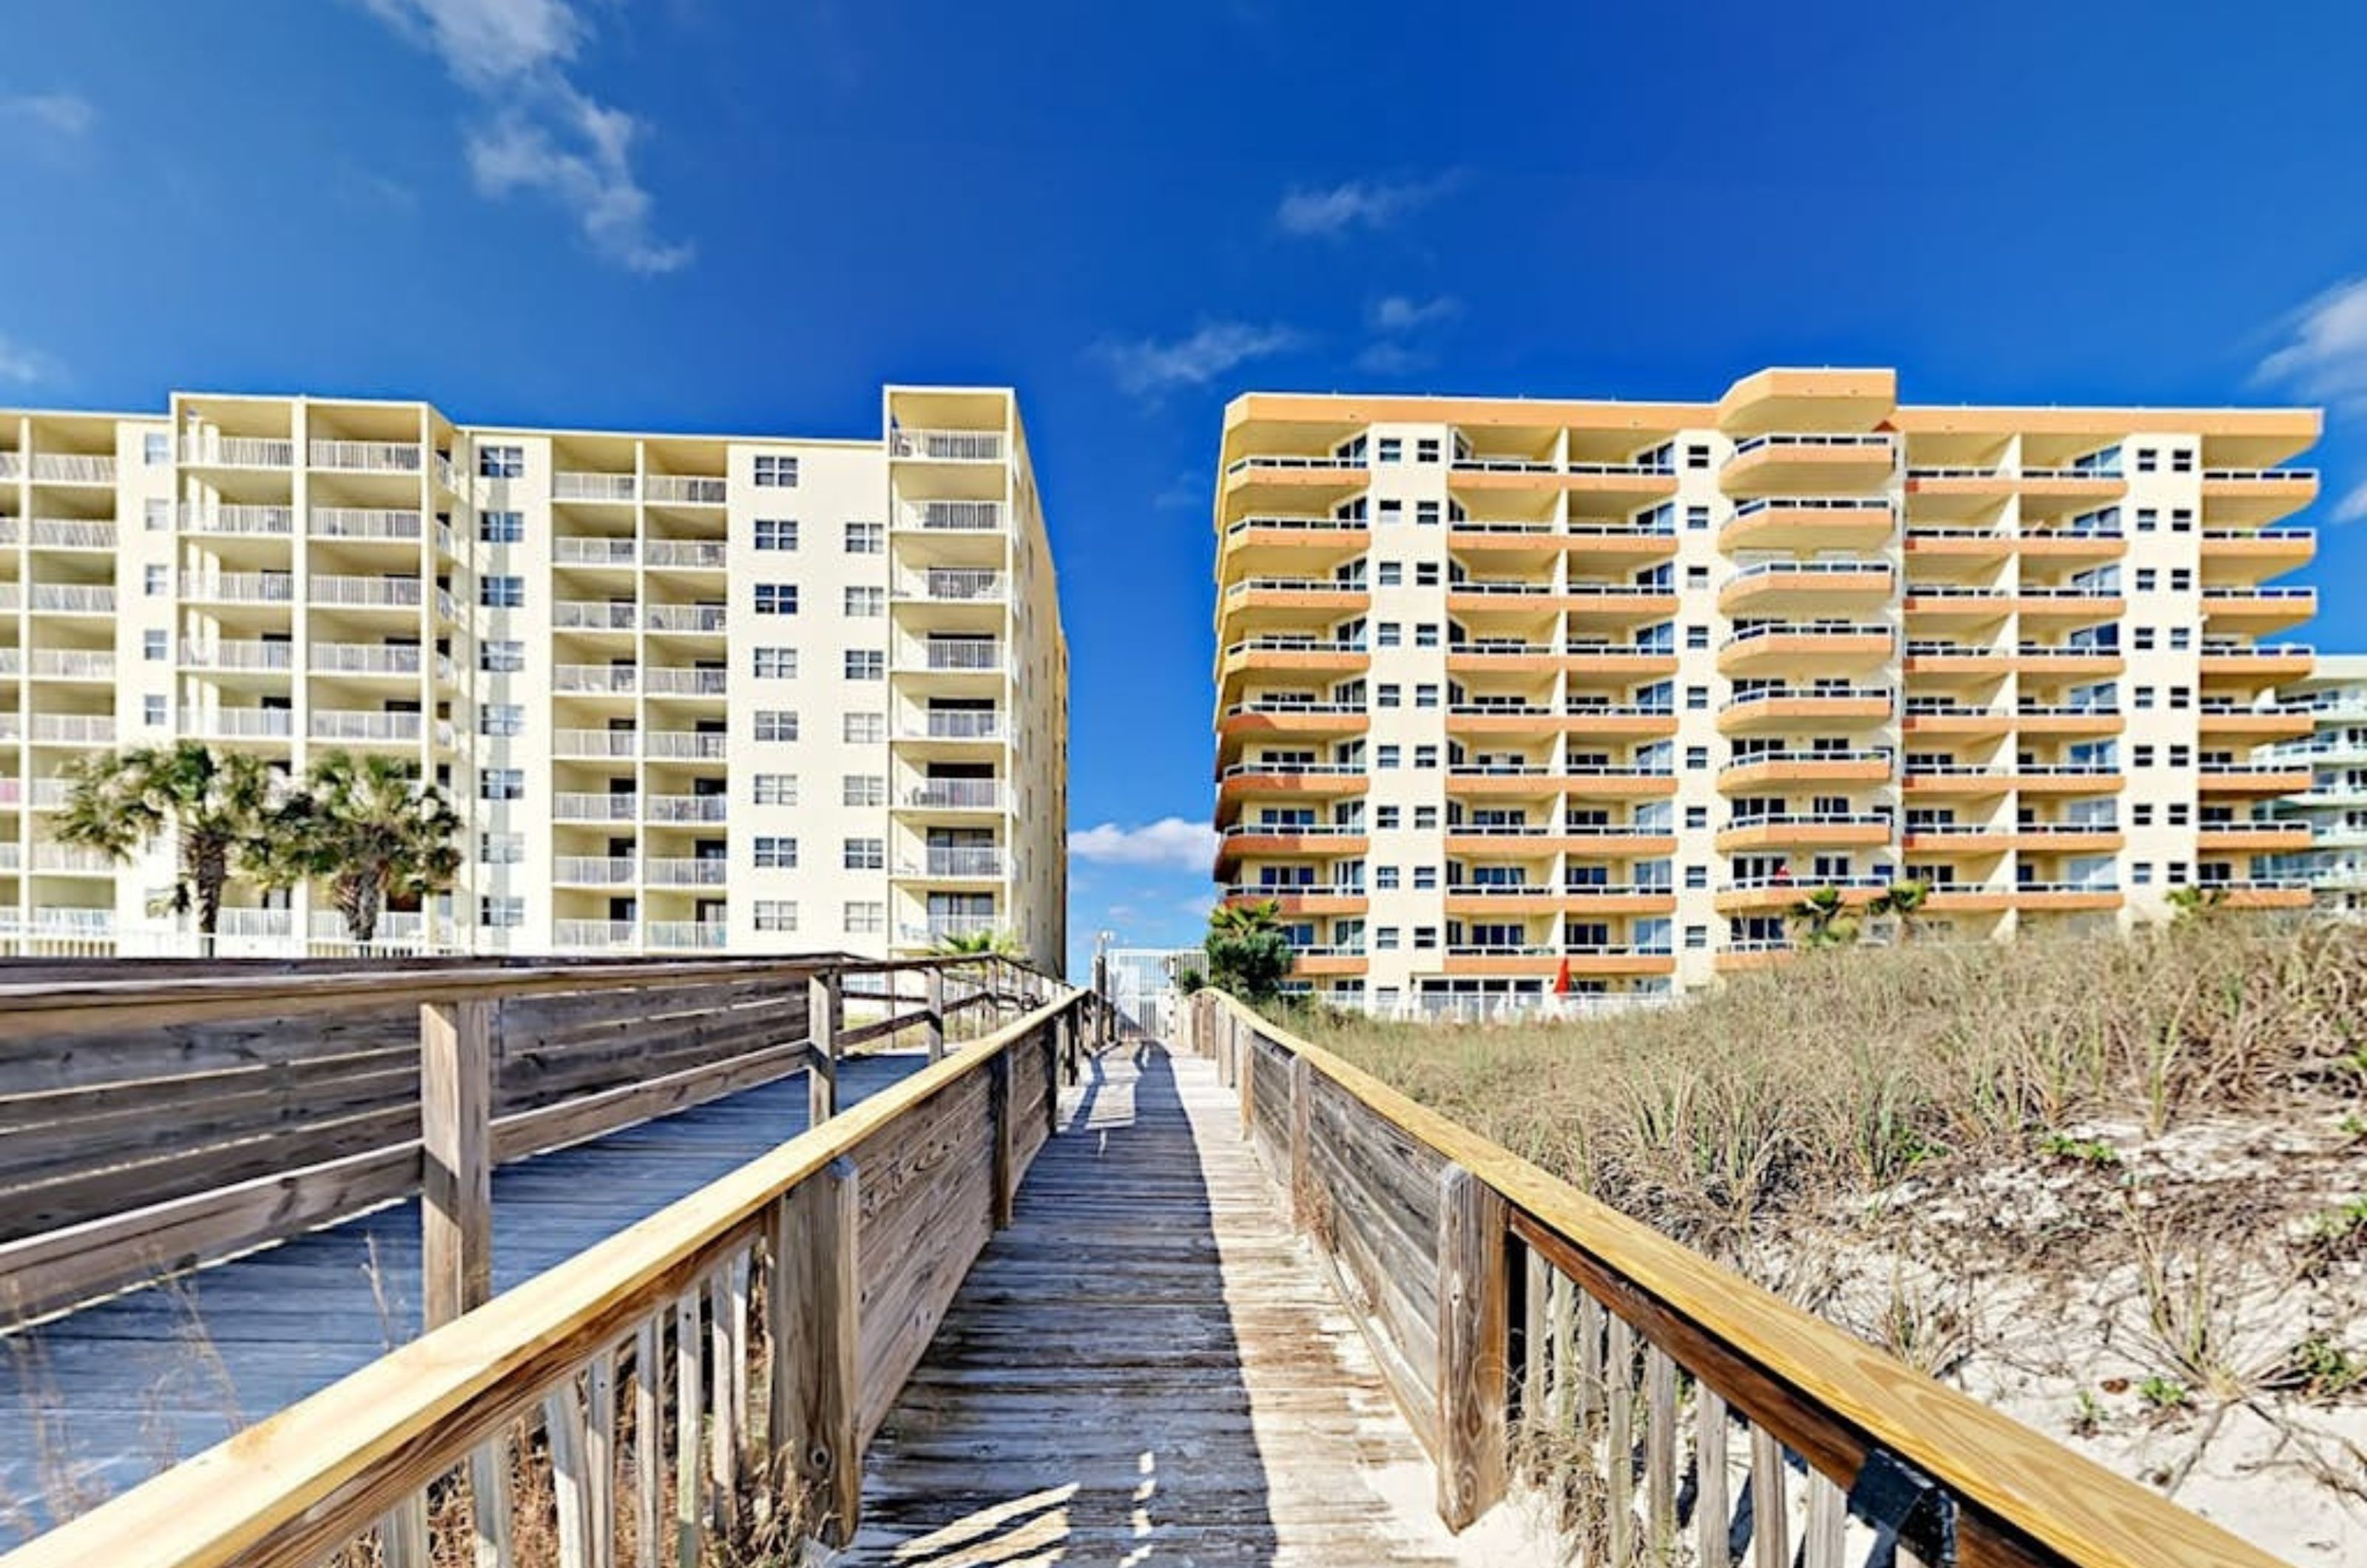 The Enclave - https://www.beachguide.com/orange-beach-vacation-rentals-the-enclave--1539-0-20245-511.jpg?width=185&height=185